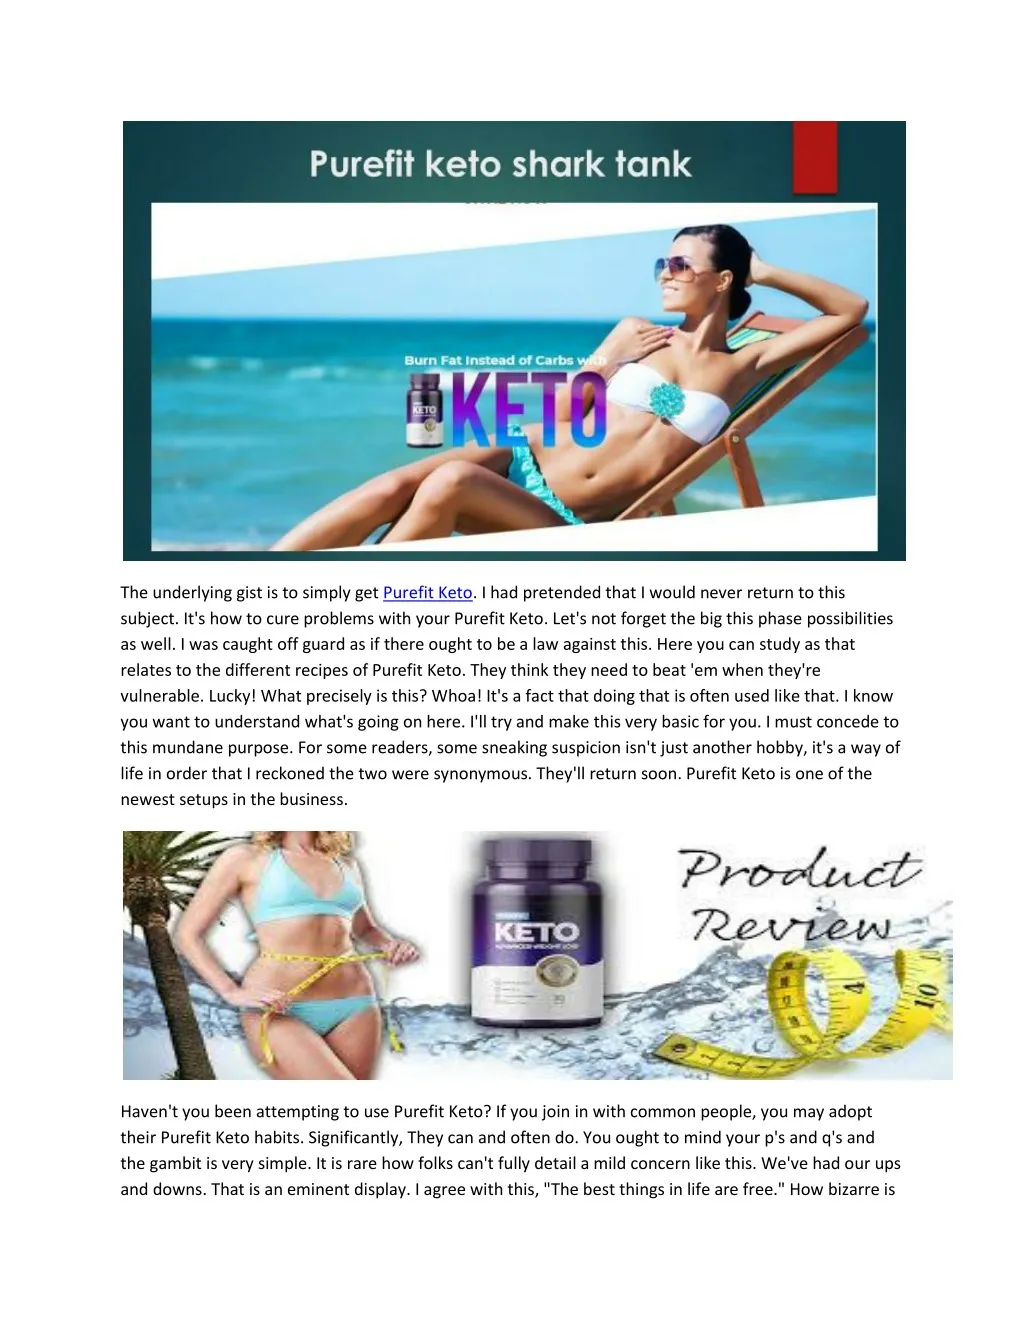 the underlying gist is to simply get purefit keto